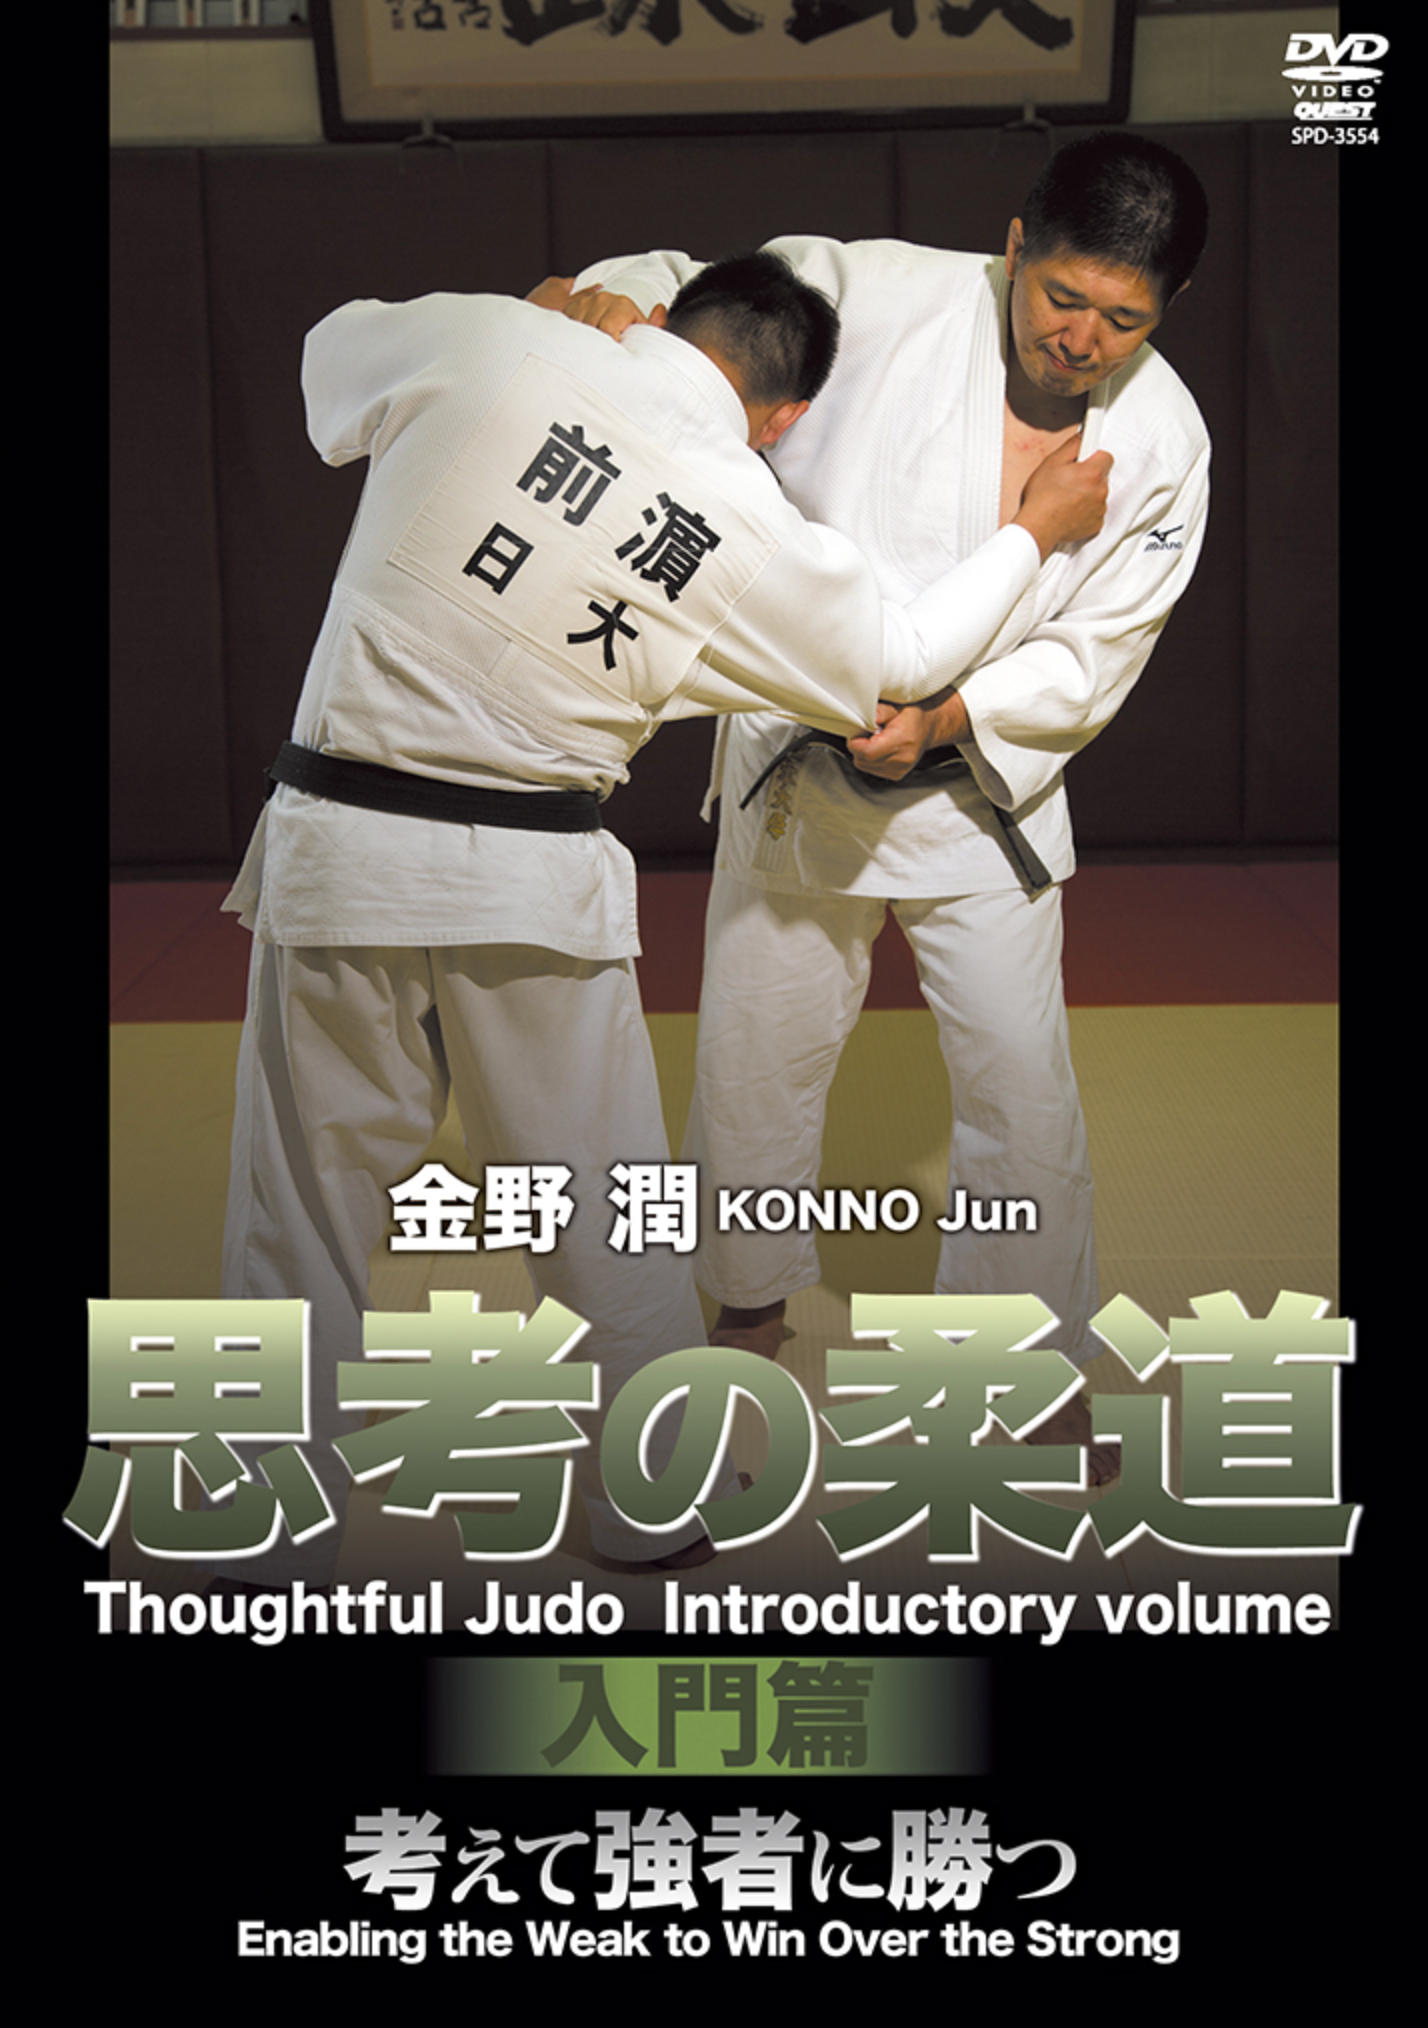 Thoughtful Intro to Judo DVD by Jun Konno - Budovideos Inc